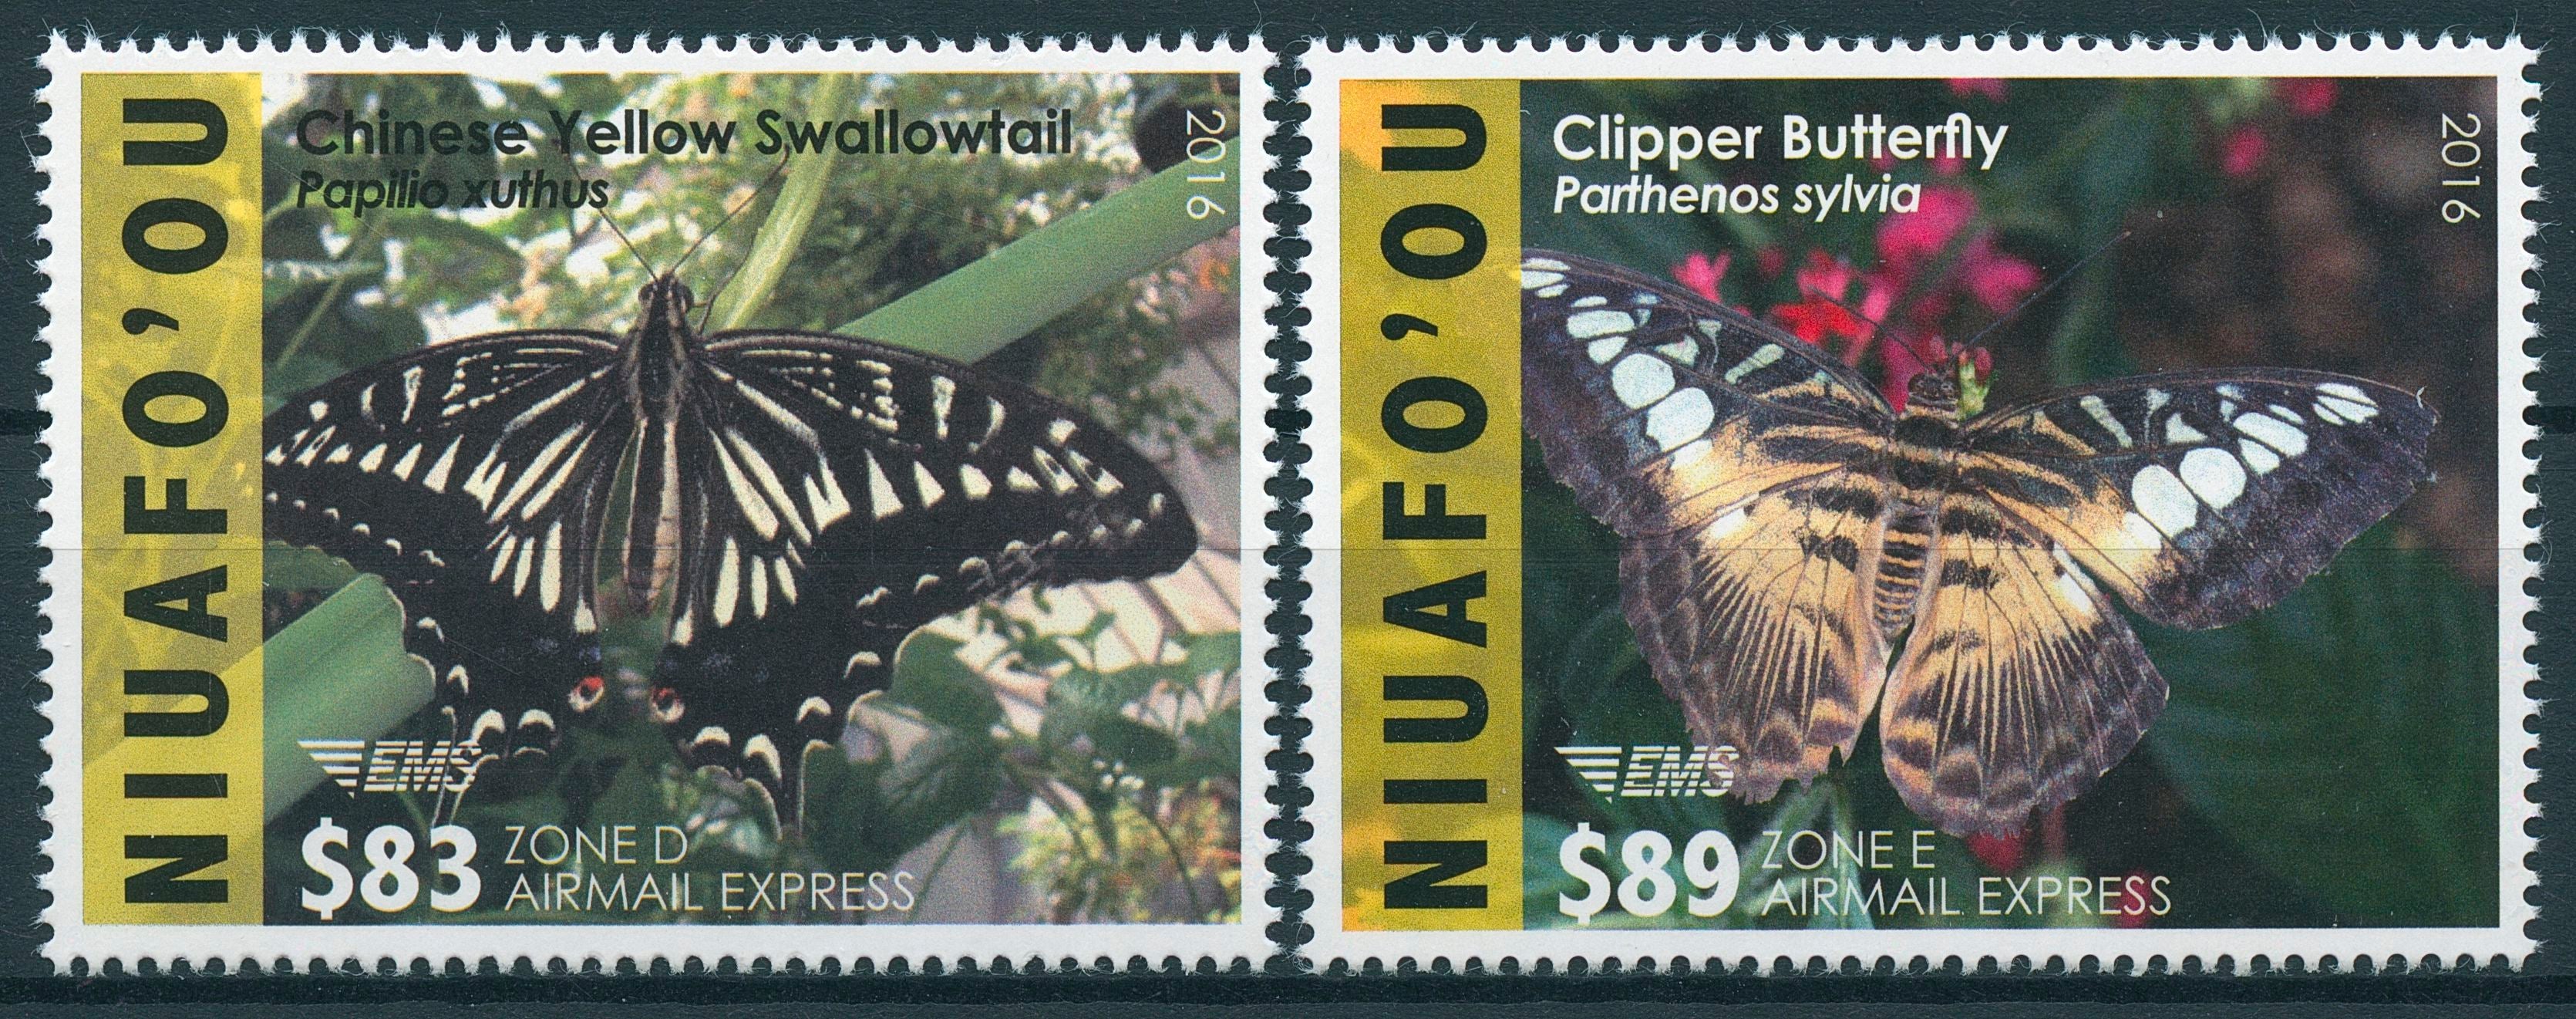 Niuafo'ou 2016 MNH Butterflies 2v Set Insects Swallowtail Butterfly EMS Stamps